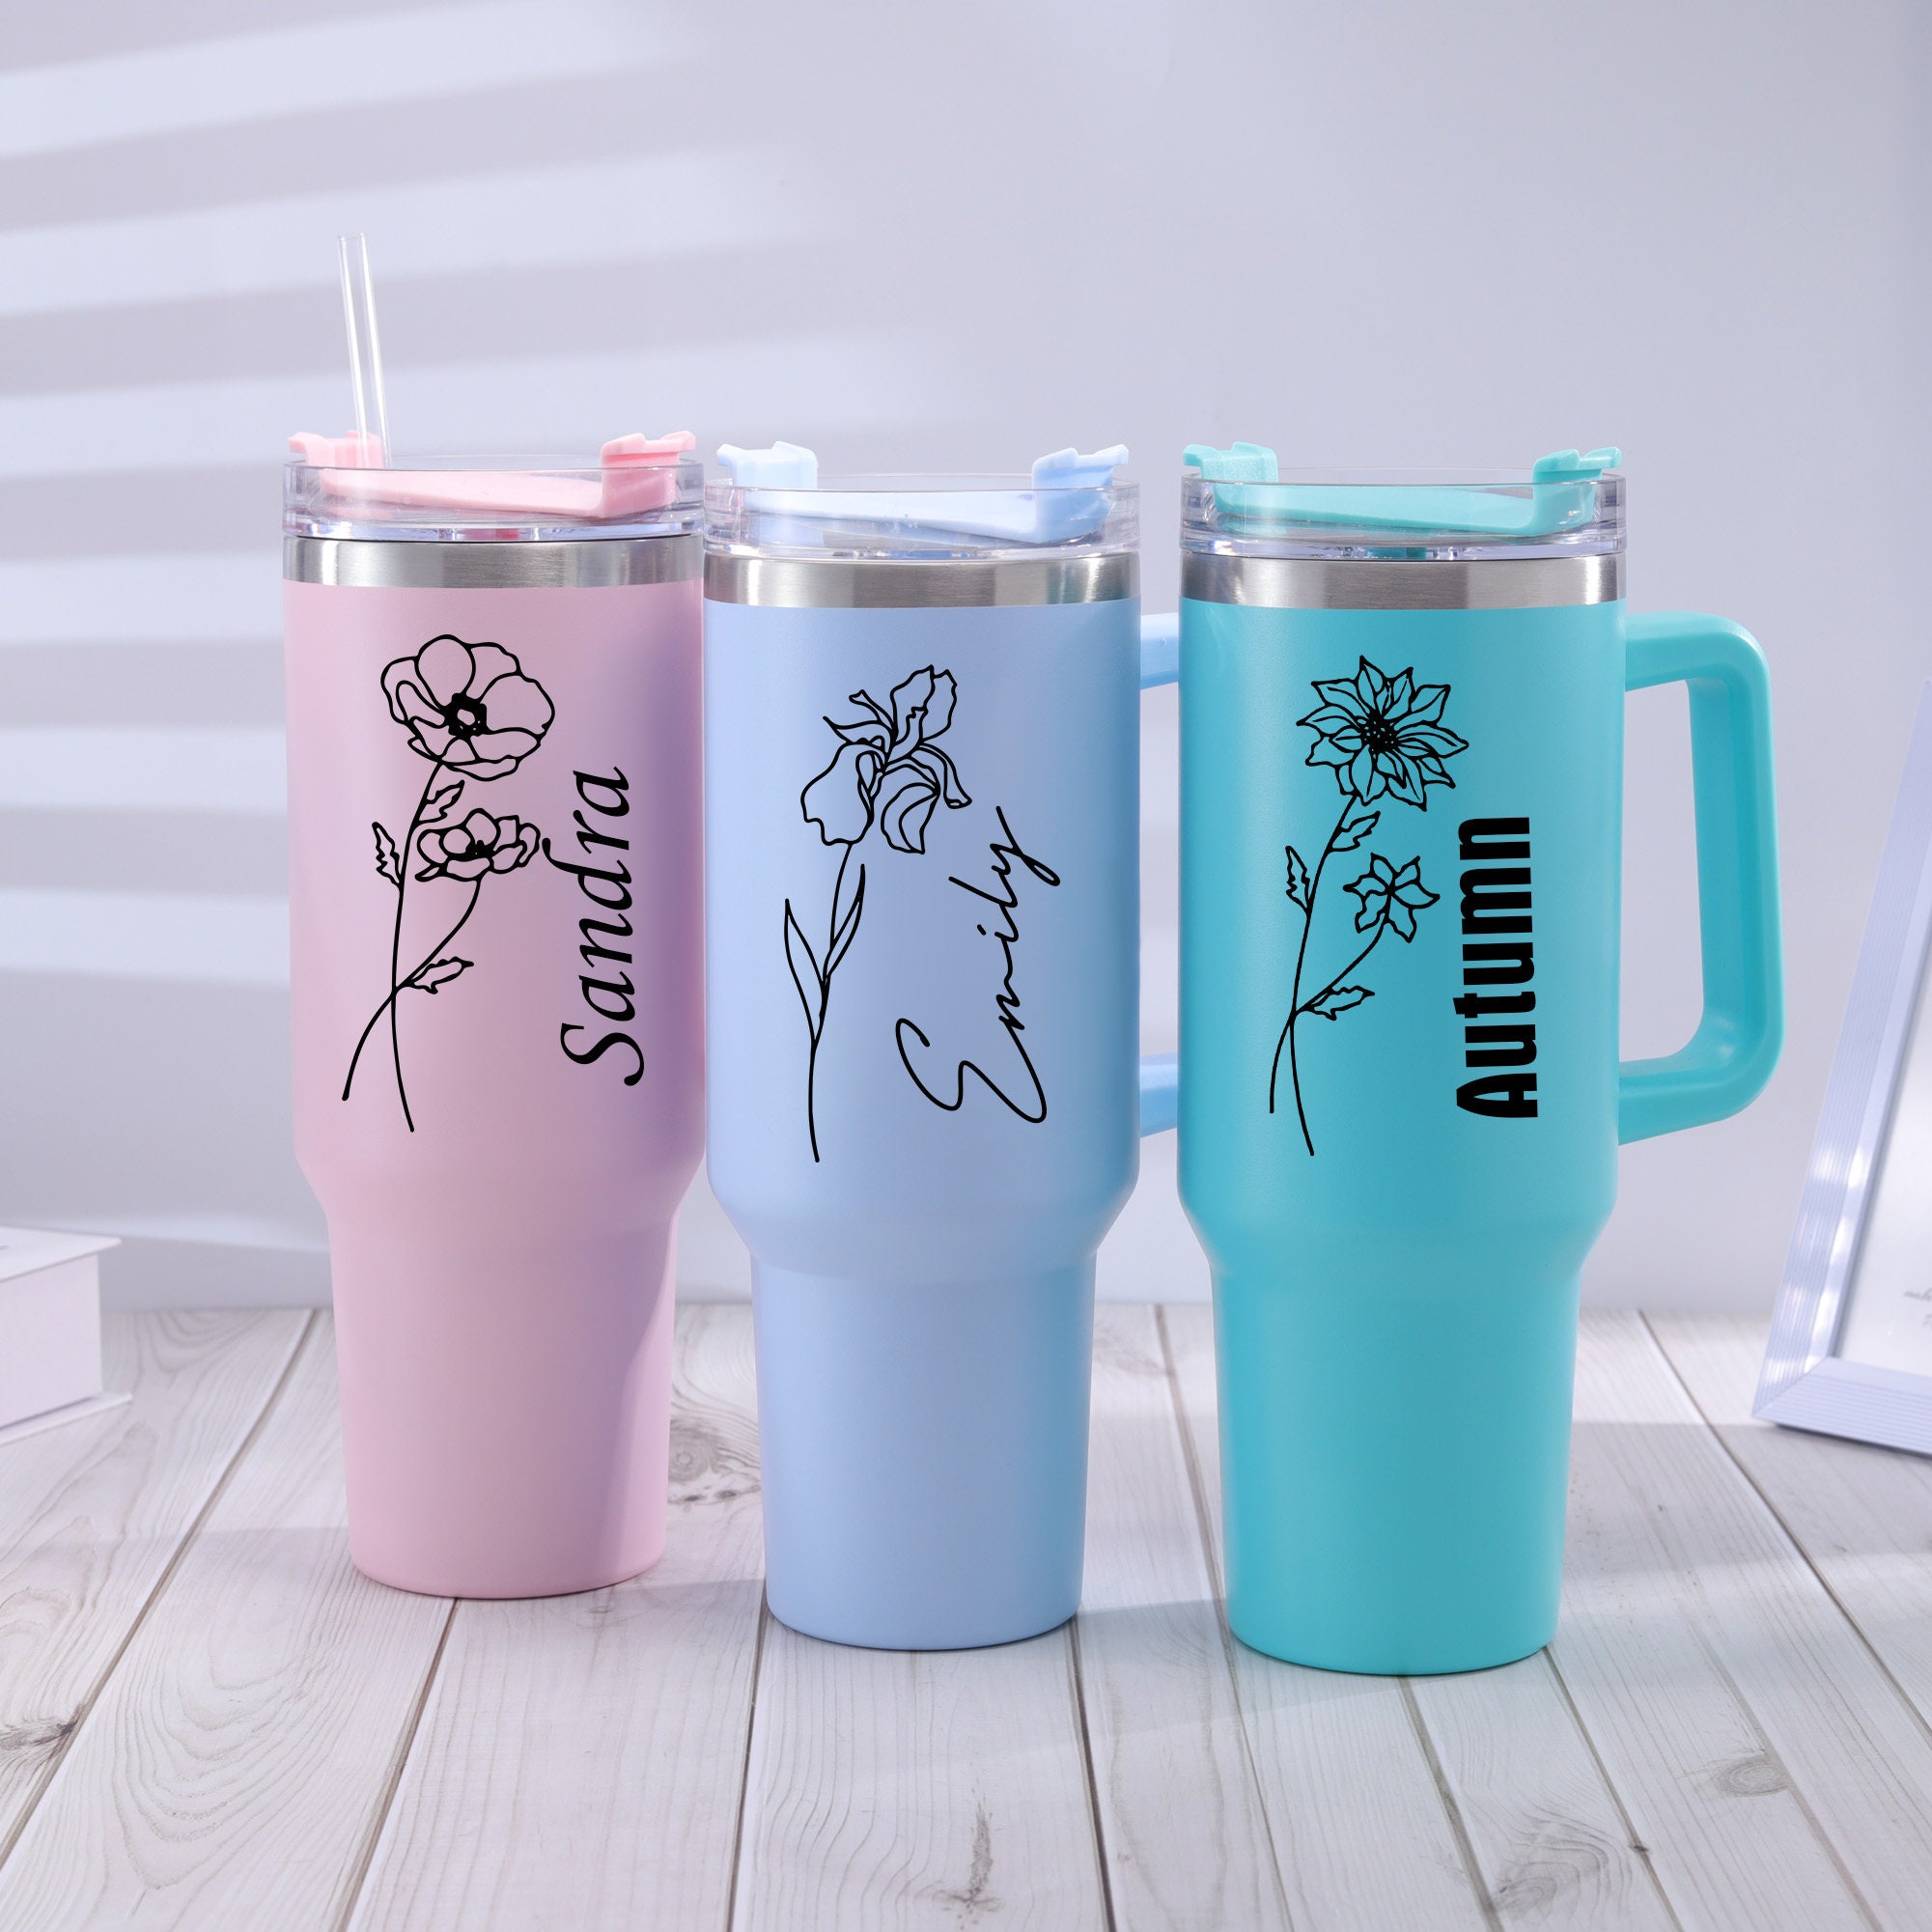 Insulated 32 oz Team Cup with Straws – Team Modern Fit